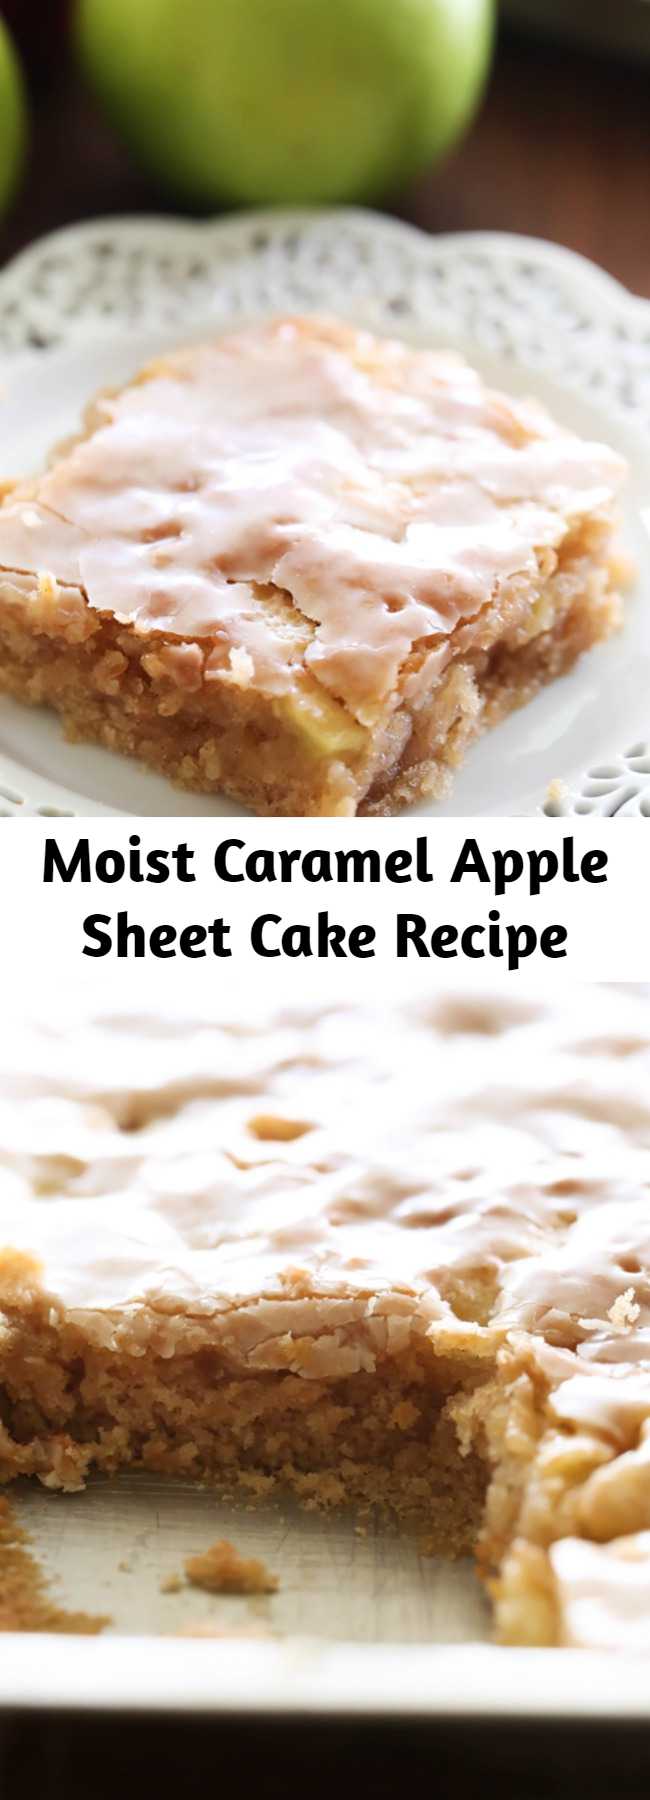 Moist Caramel Apple Sheet Cake Recipe - This delicious apple cake is perfectly moist and has caramel frosting infused in each and every bite! It is heavenly!